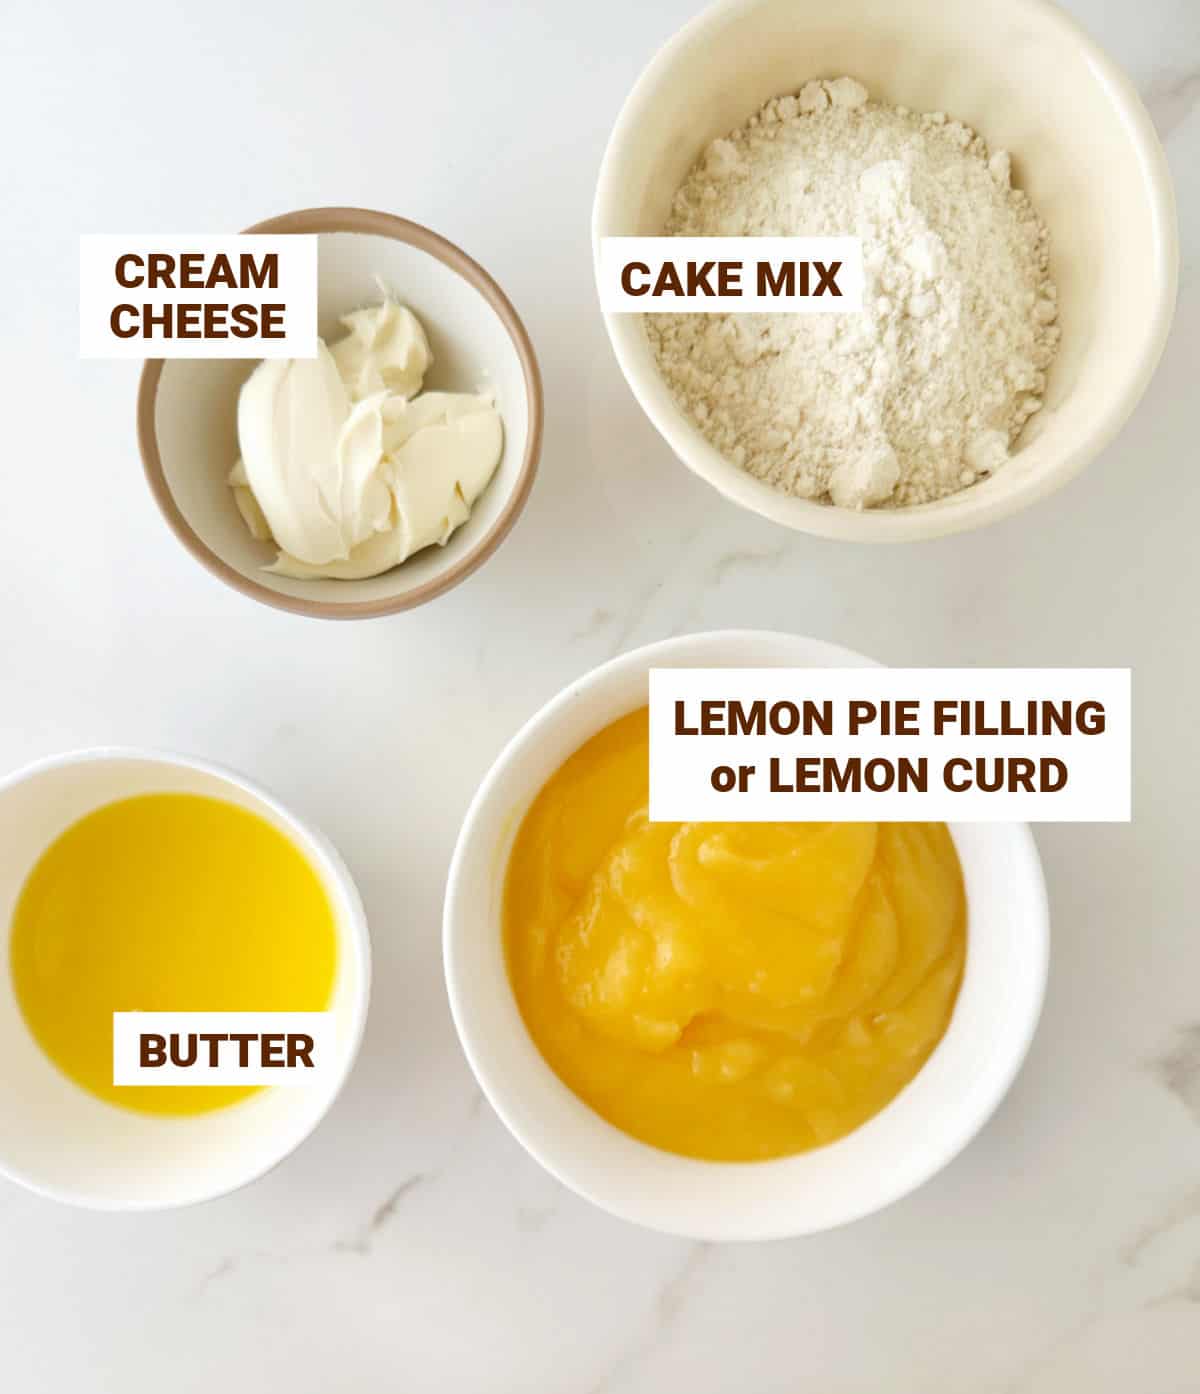 Bowls on a white surface with ingredients for lemon dump cake including cream cheese, lemon curd, butter and cake mix.